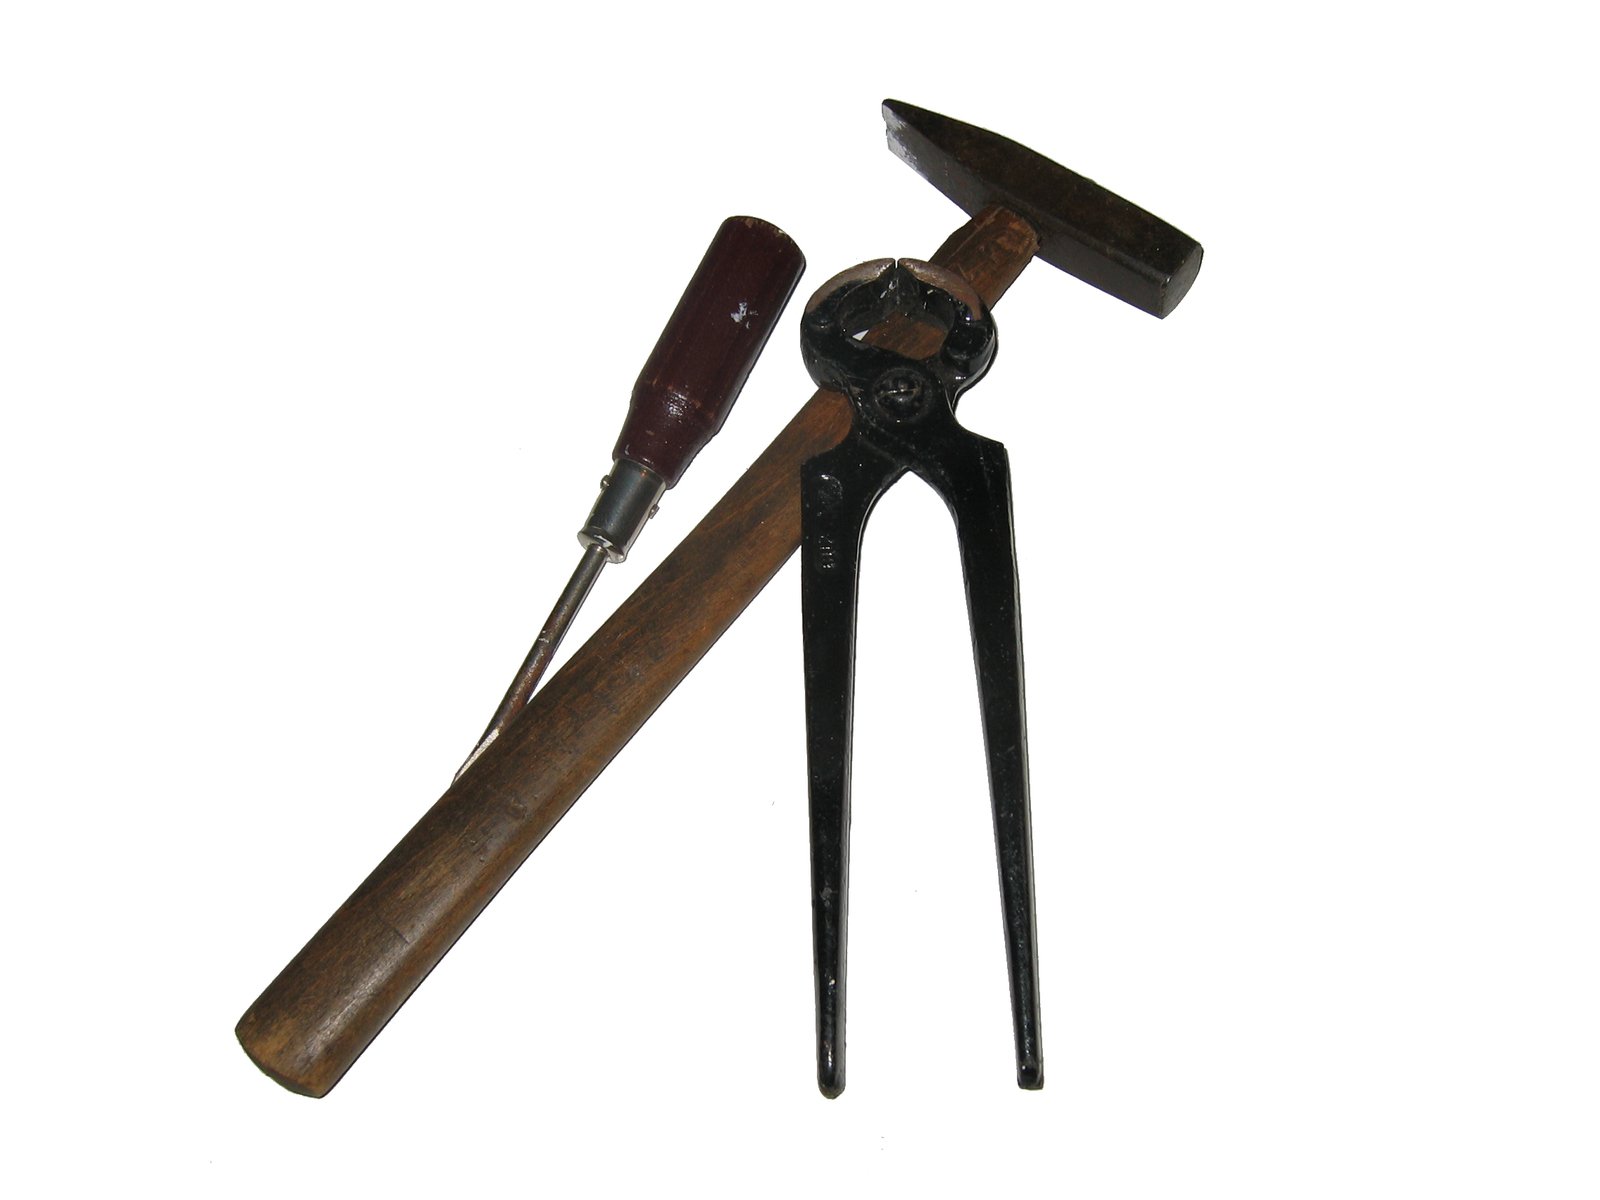 a pair of tools is on display on a white background